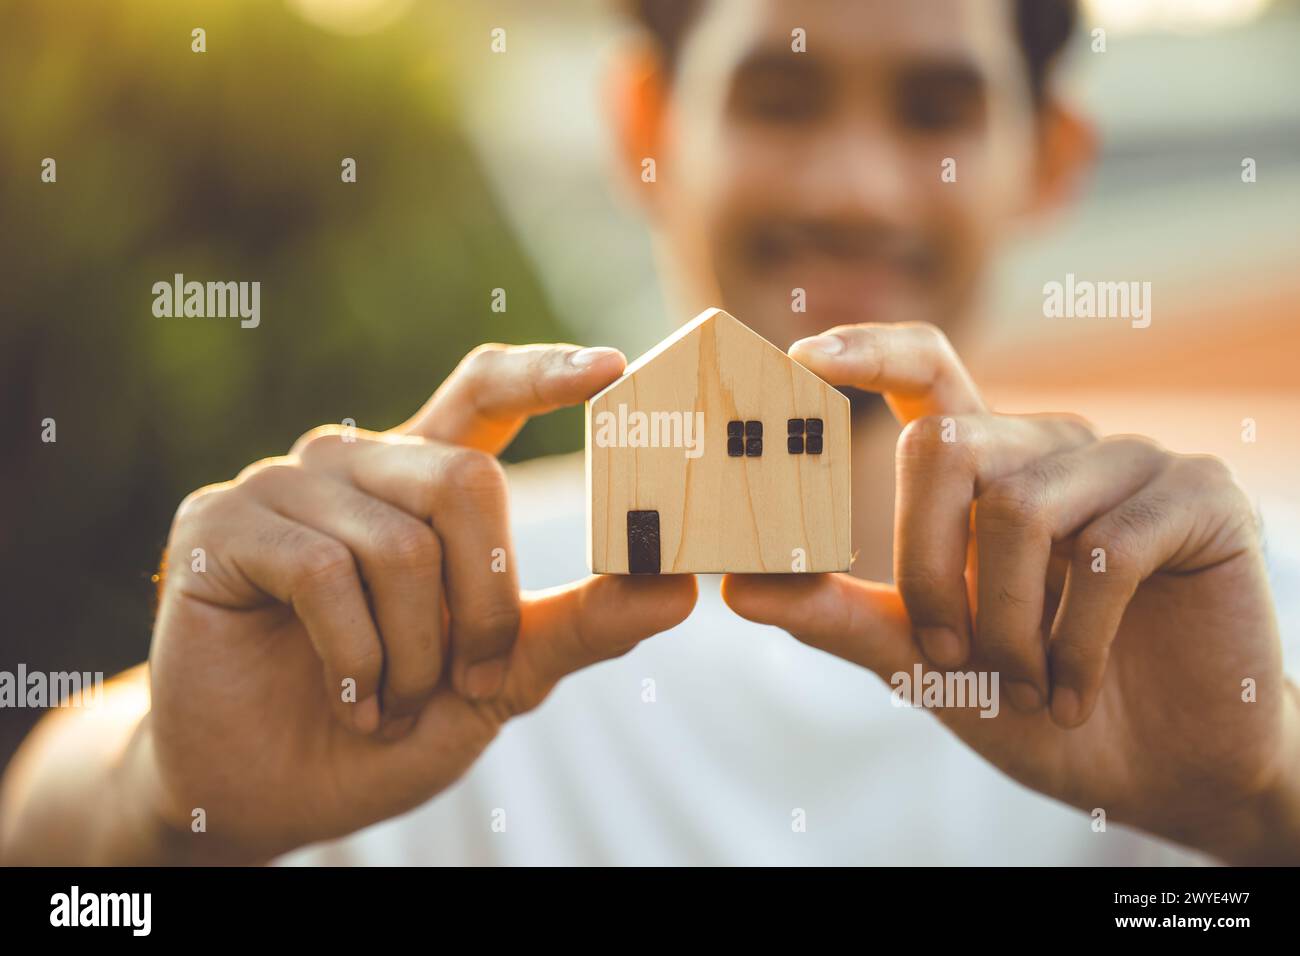 people hand holding miniature wooden house model for banking housing mortgage real estate rent lease home family concept Stock Photo